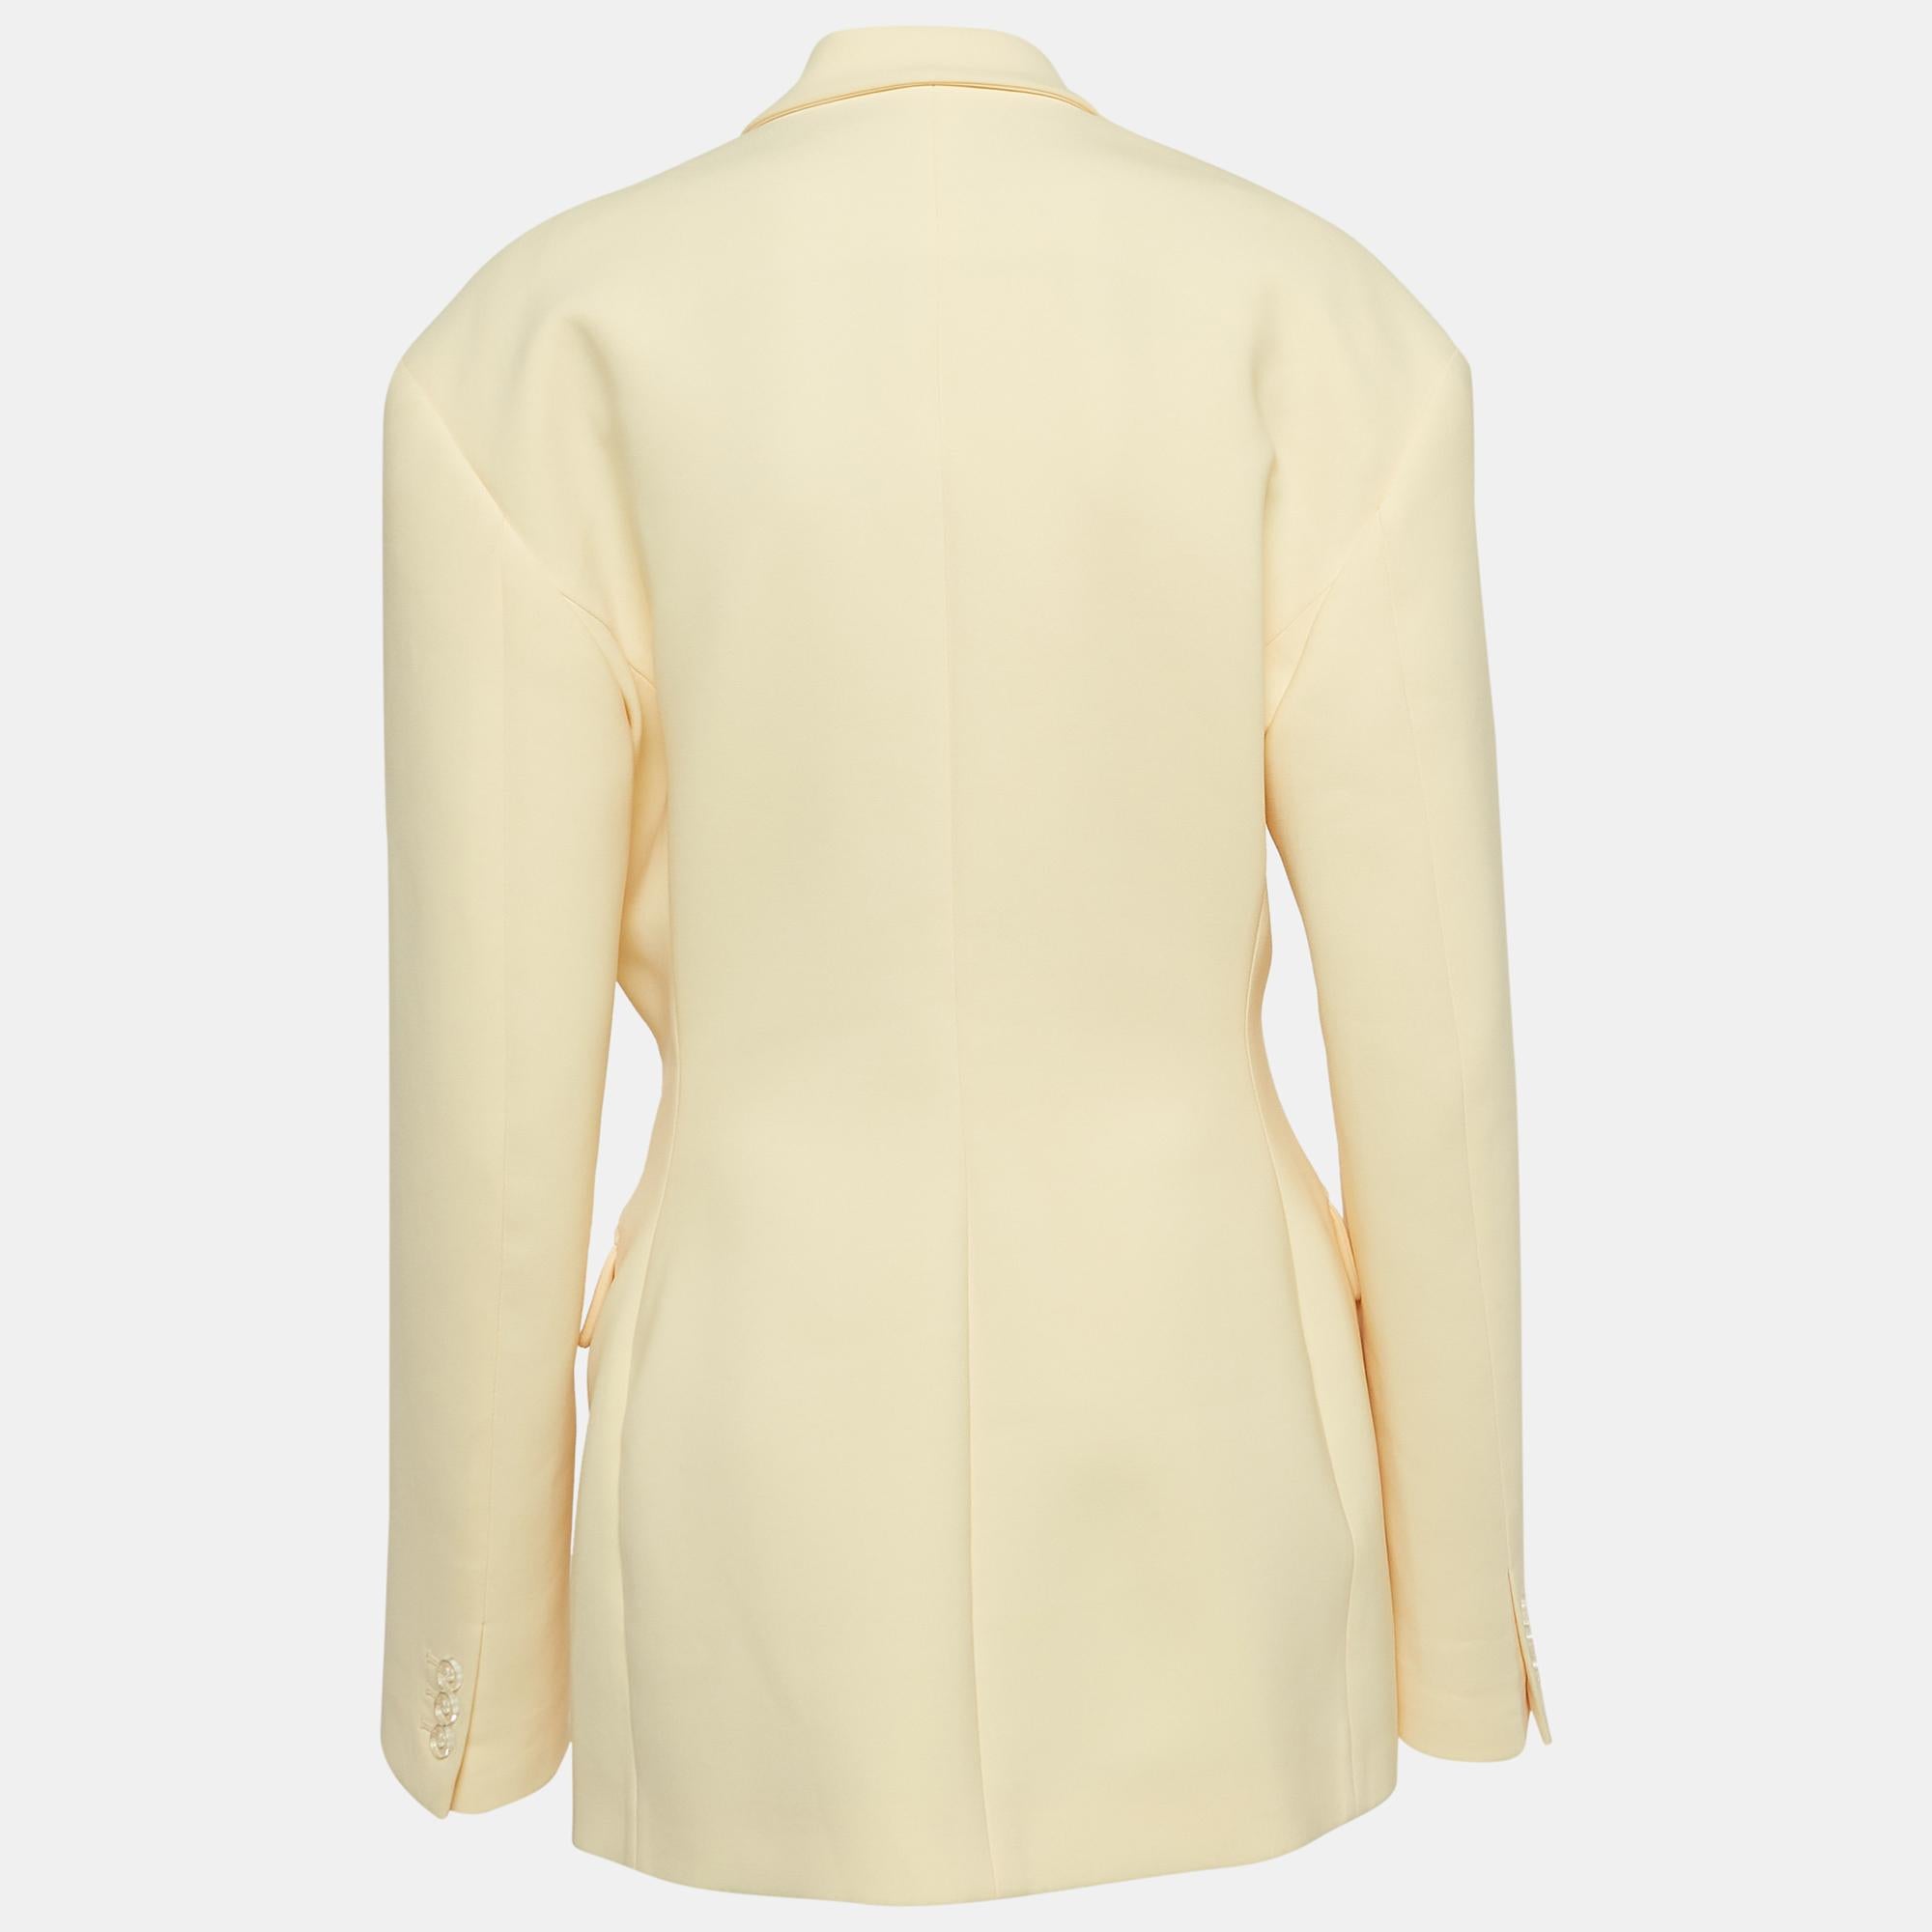 This The Attico blazer brings you both class and luxury as you wear it. It is highlighted with long sleeves and classic details, thus granting a polished, formal finish.

Includes: Brand Tag